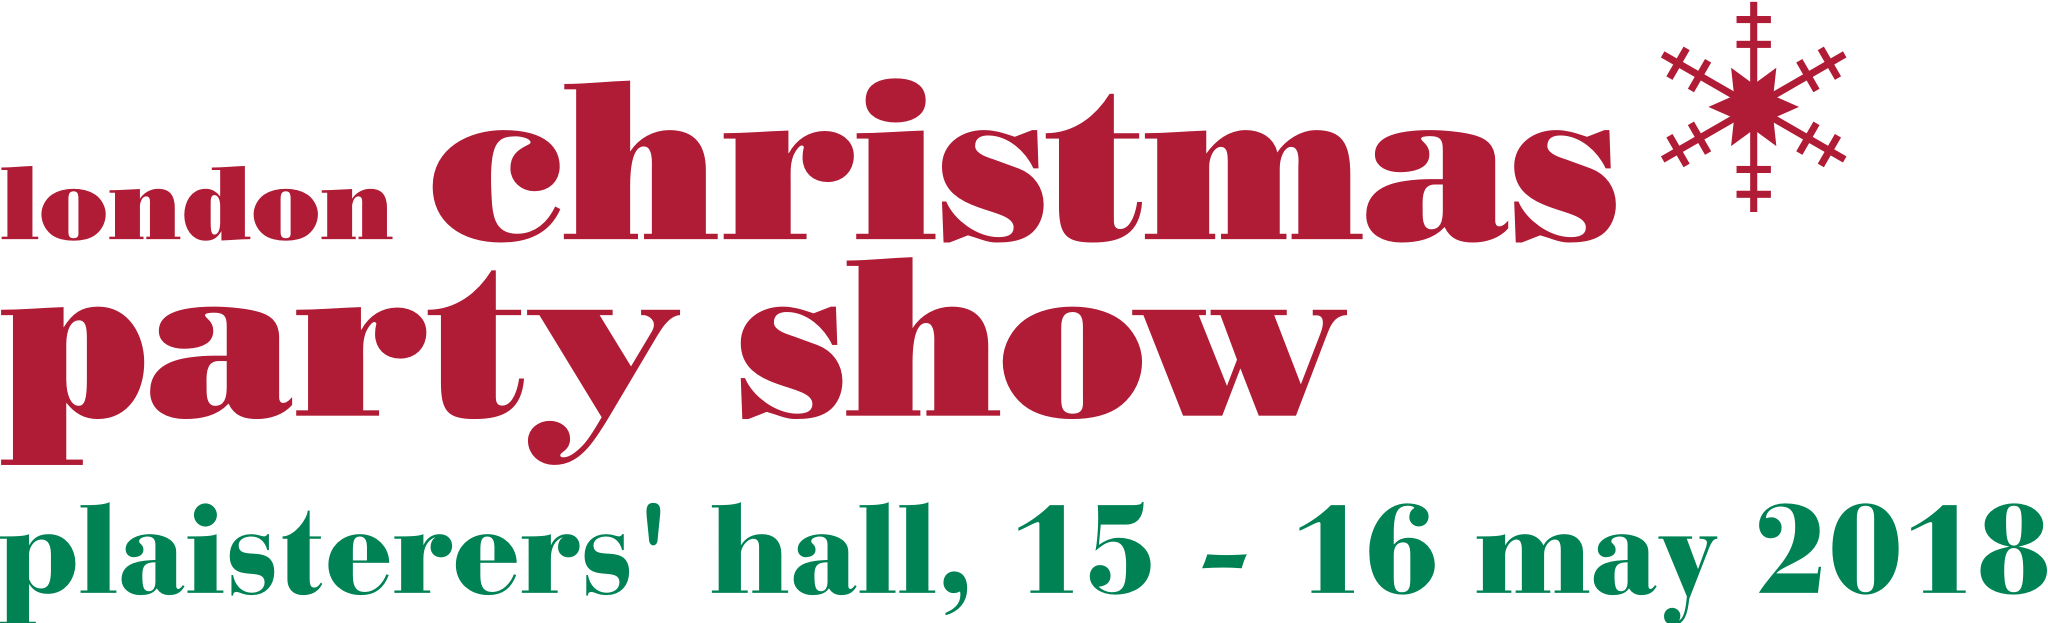 London Christmas Party Show – An Exhibition Featuring the Industry's